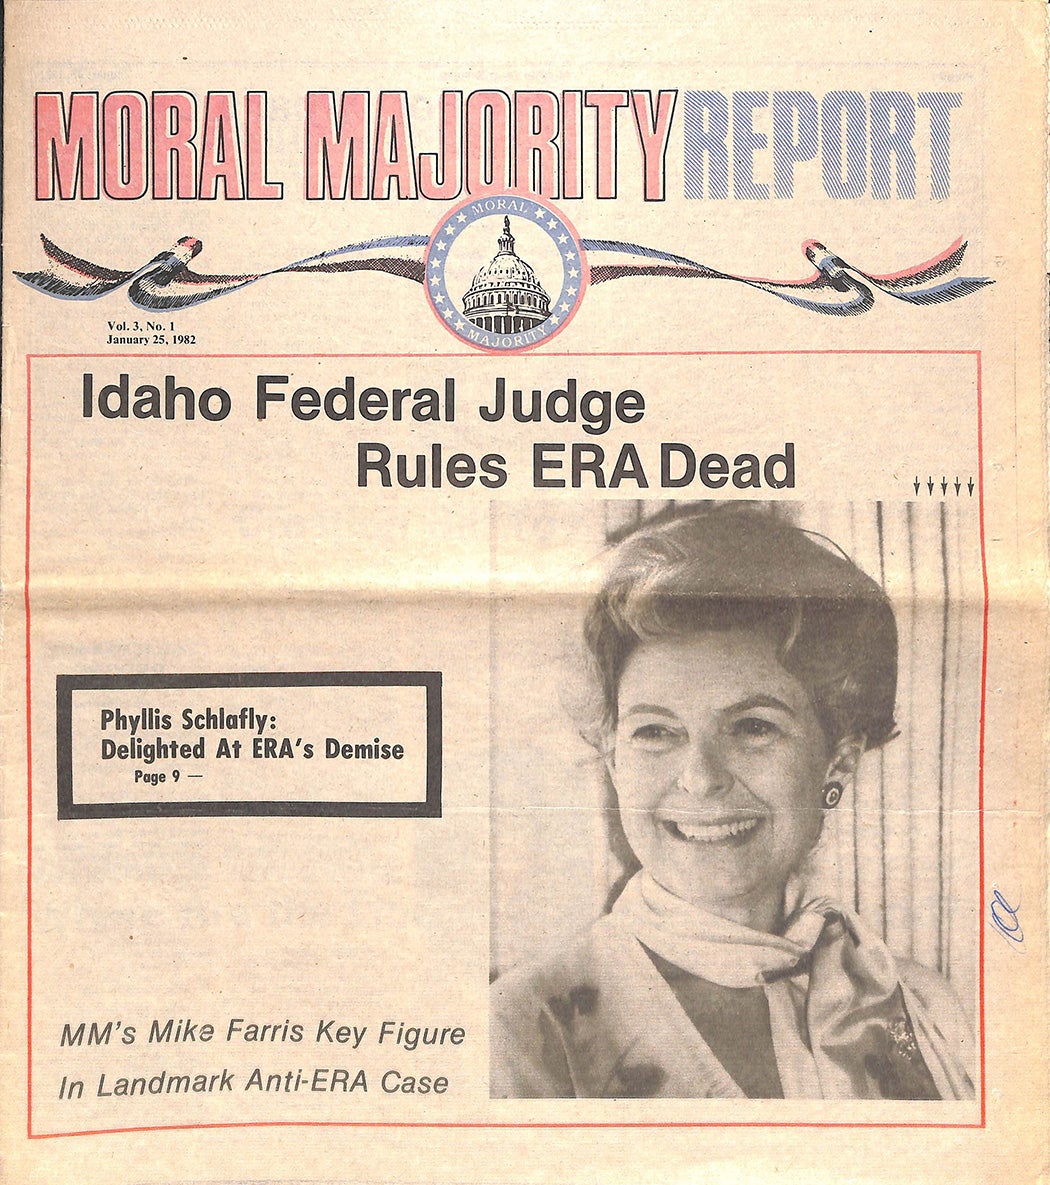 The Moral Majority Report January 1982